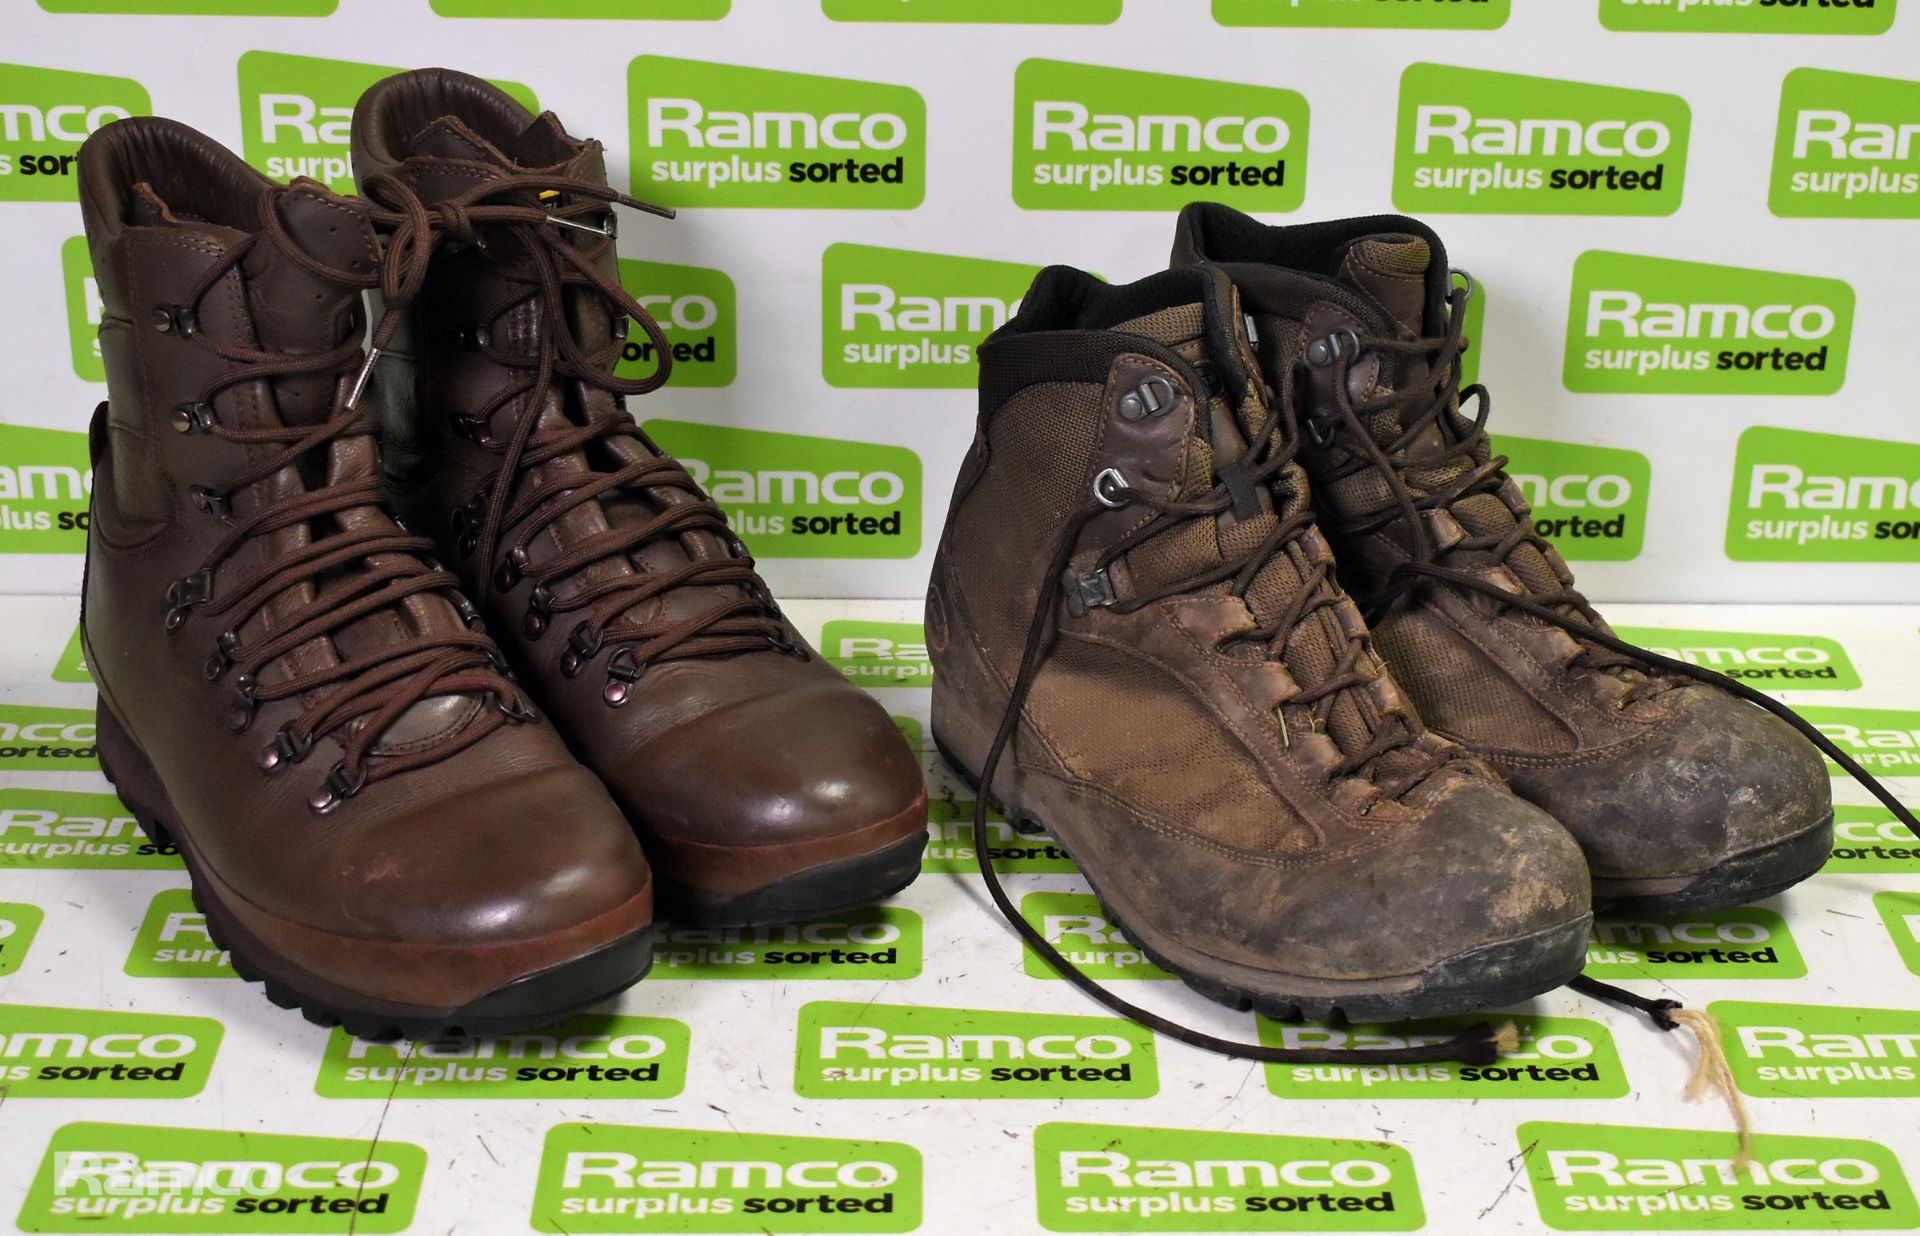 50x pairs of Various boots including Magnum, Iturri & YDS - mixed grades and sizes - Image 11 of 21